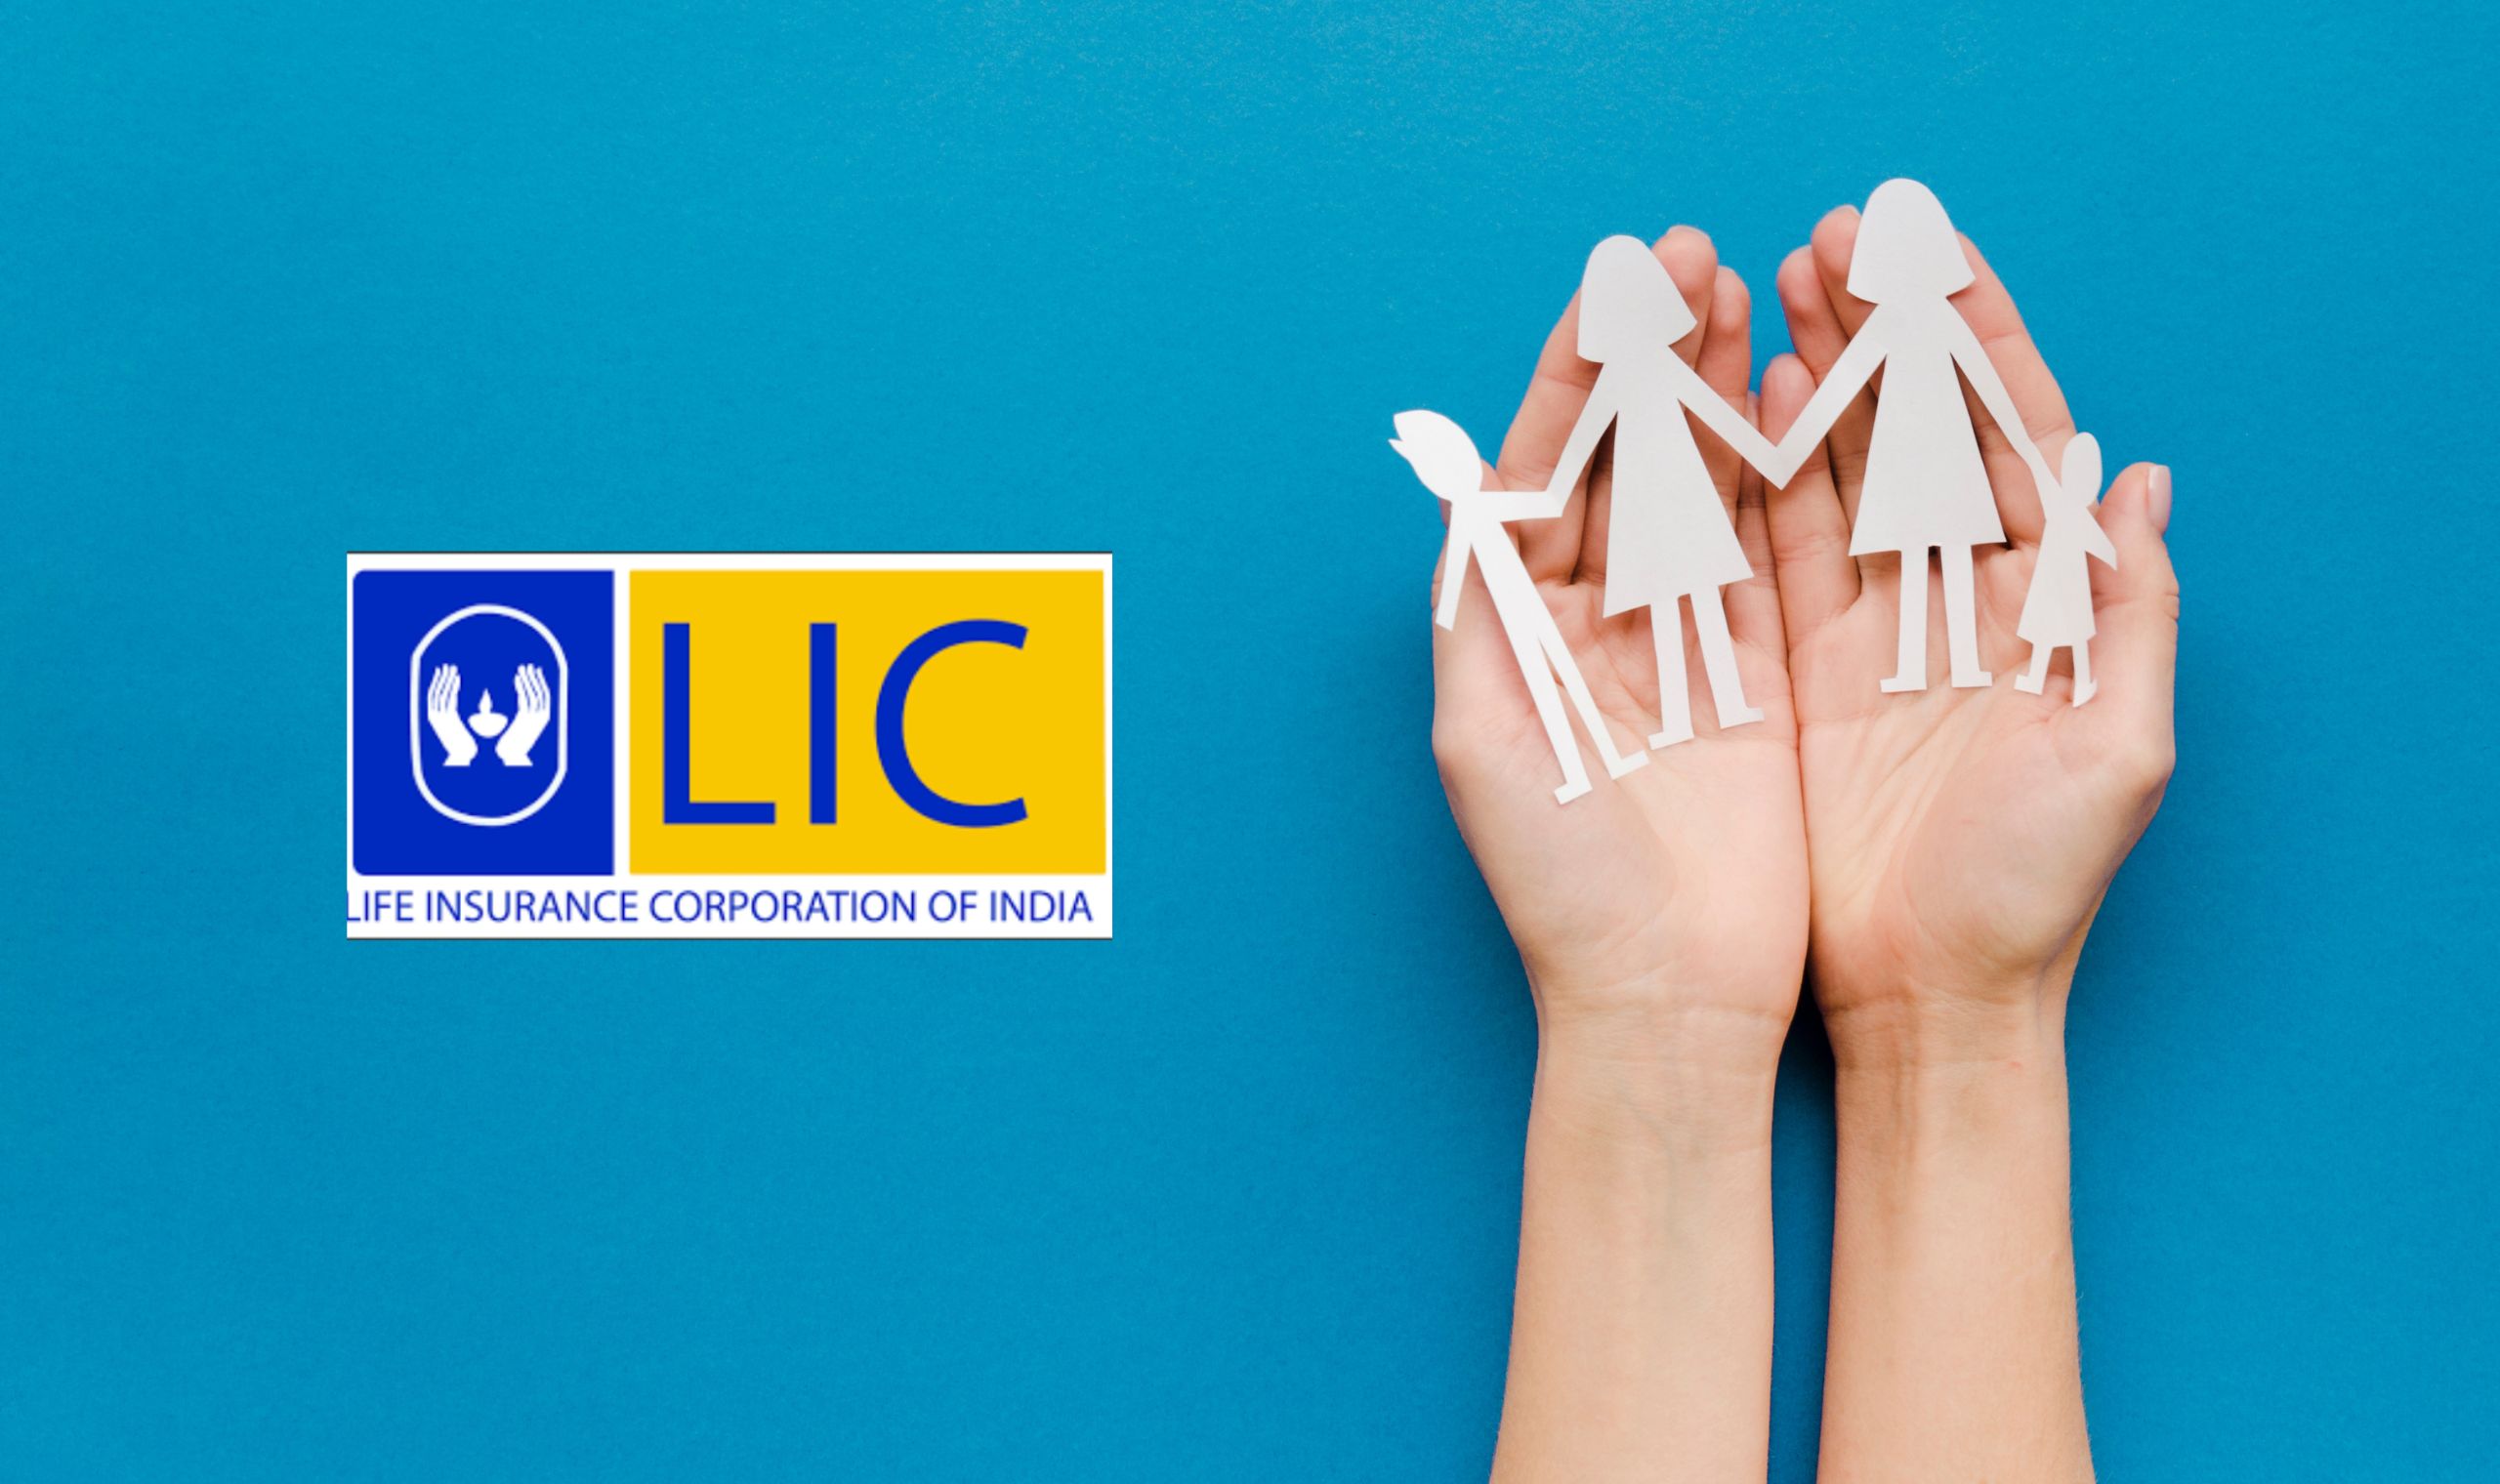 LIC Shares Surpass Issue Price Mark, Soar 4% for First Time